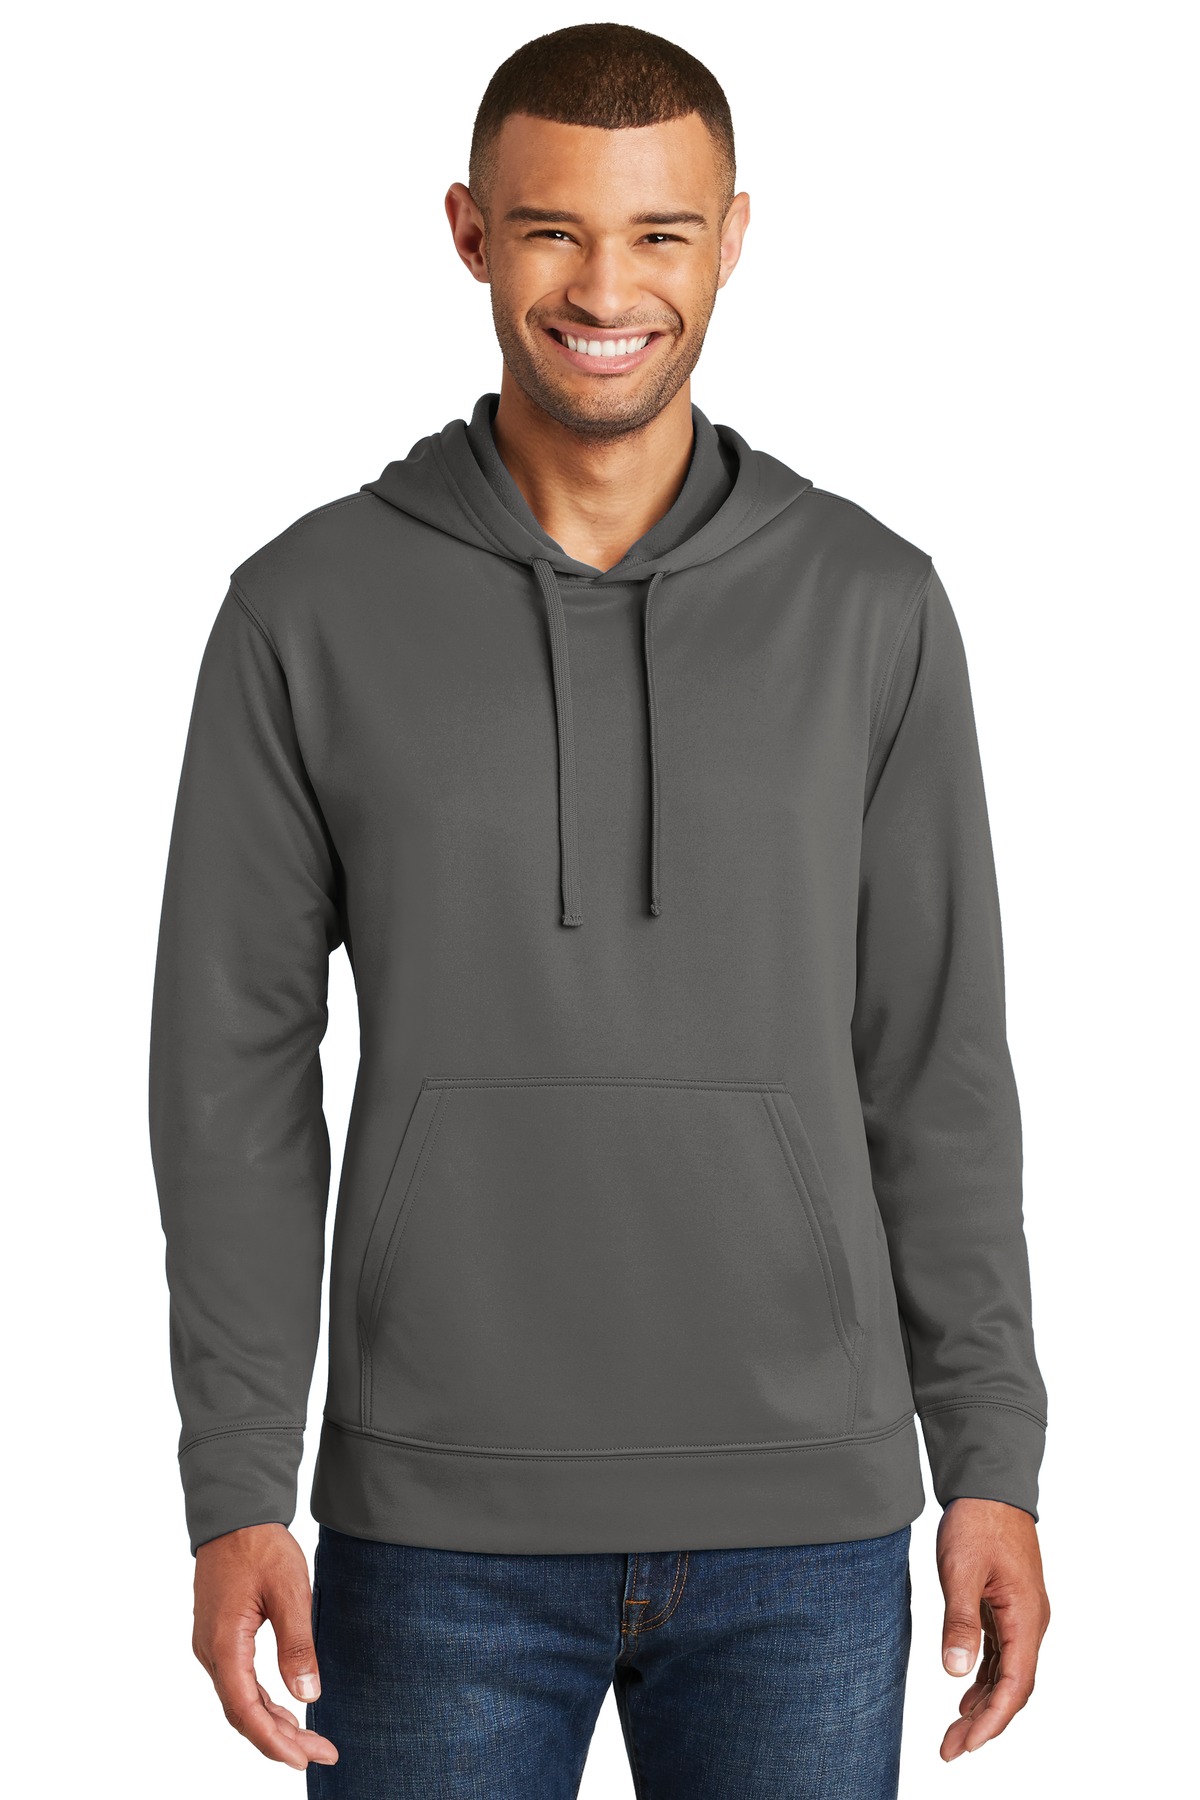 Port and Company Performance Fleece Pullover Hooded Sweatshirt. PC590H